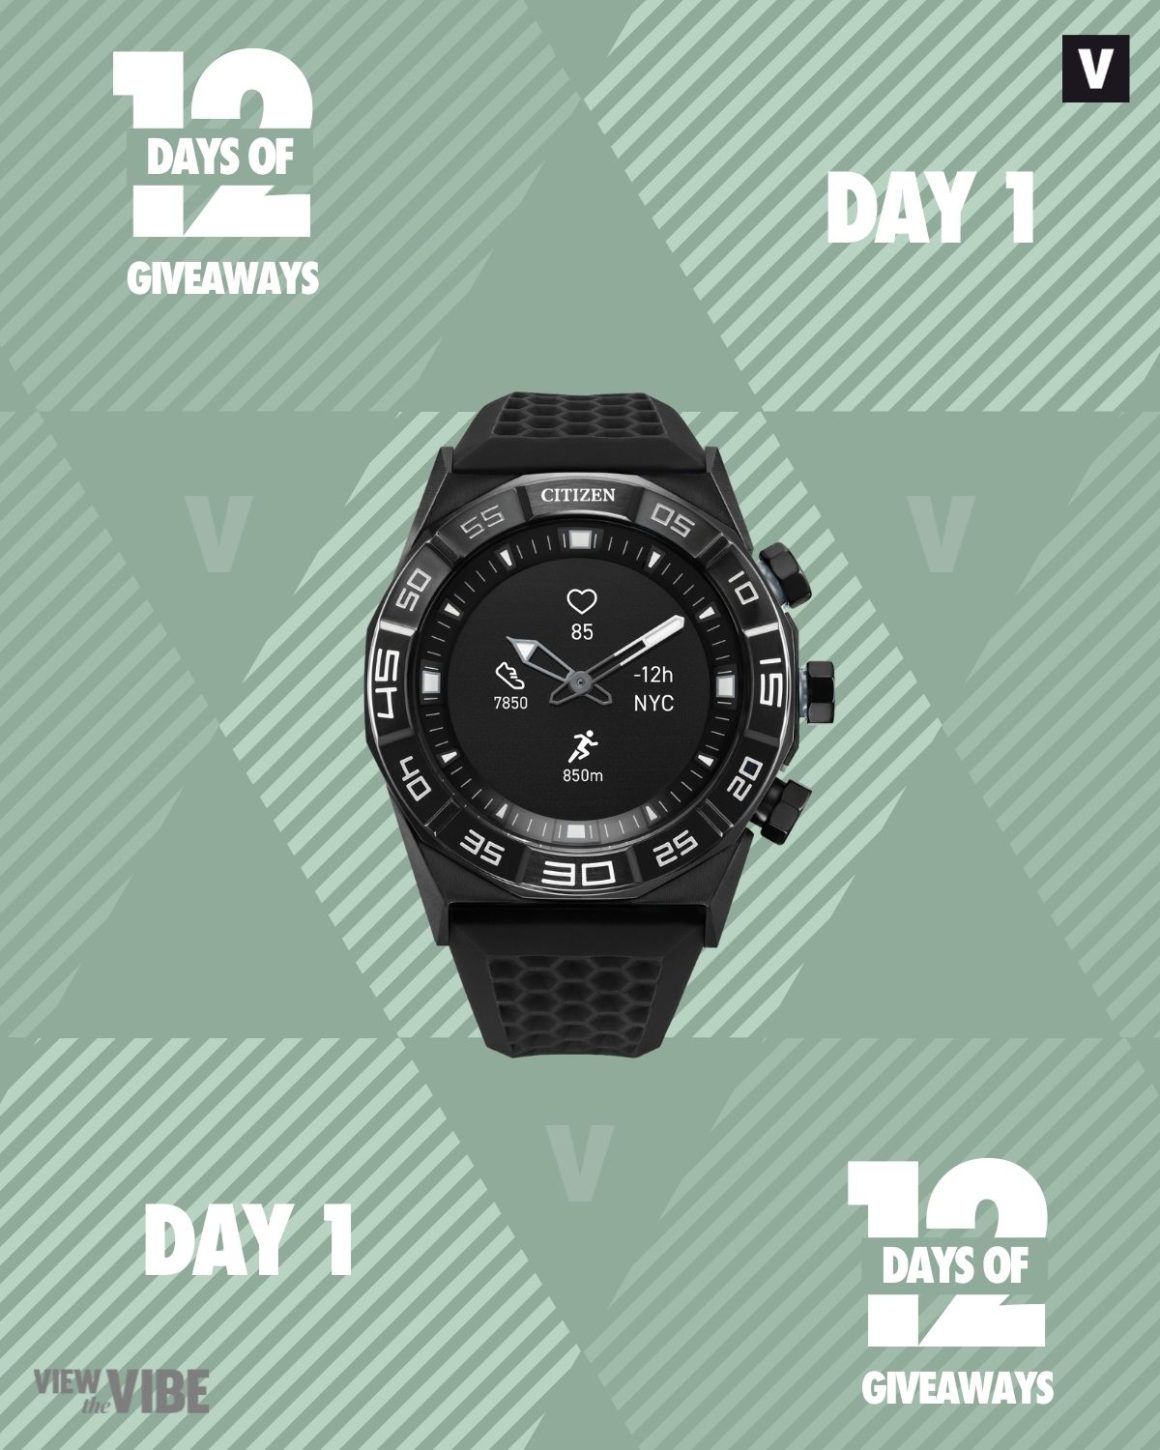 12 Days of Giveaways Day 1